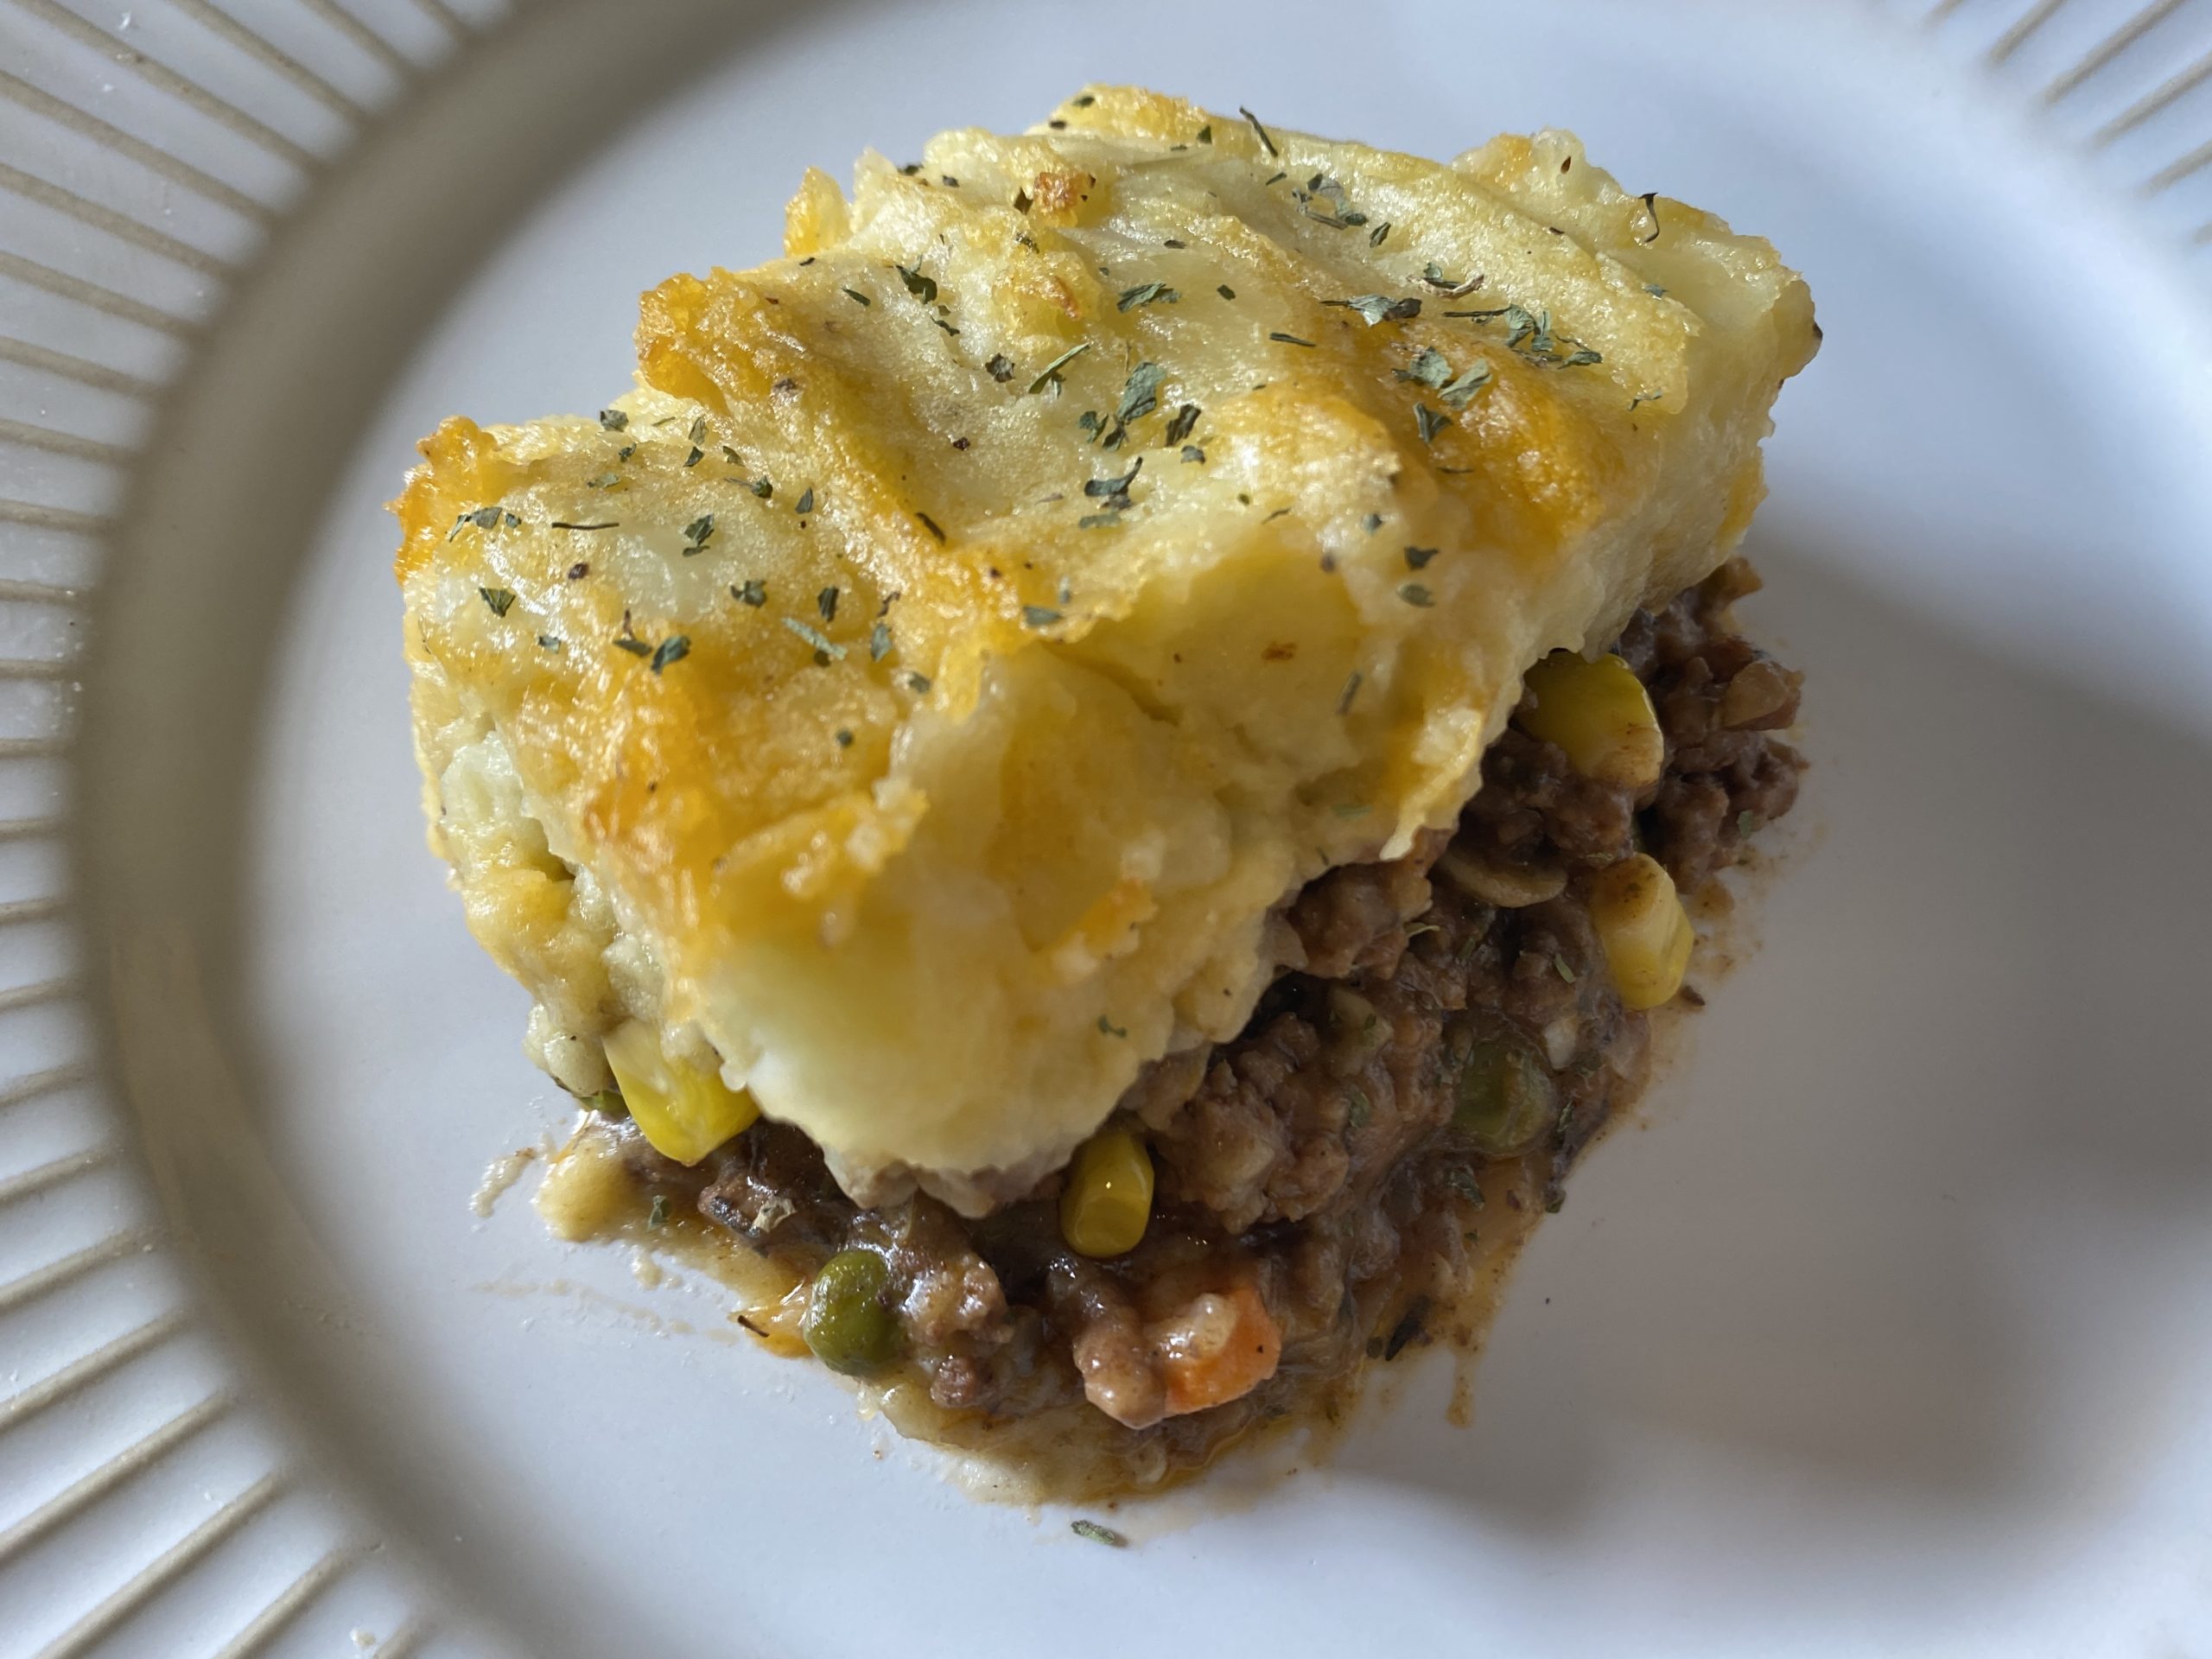 A Classic and Hearty Casserole — Shepherd’s Pie